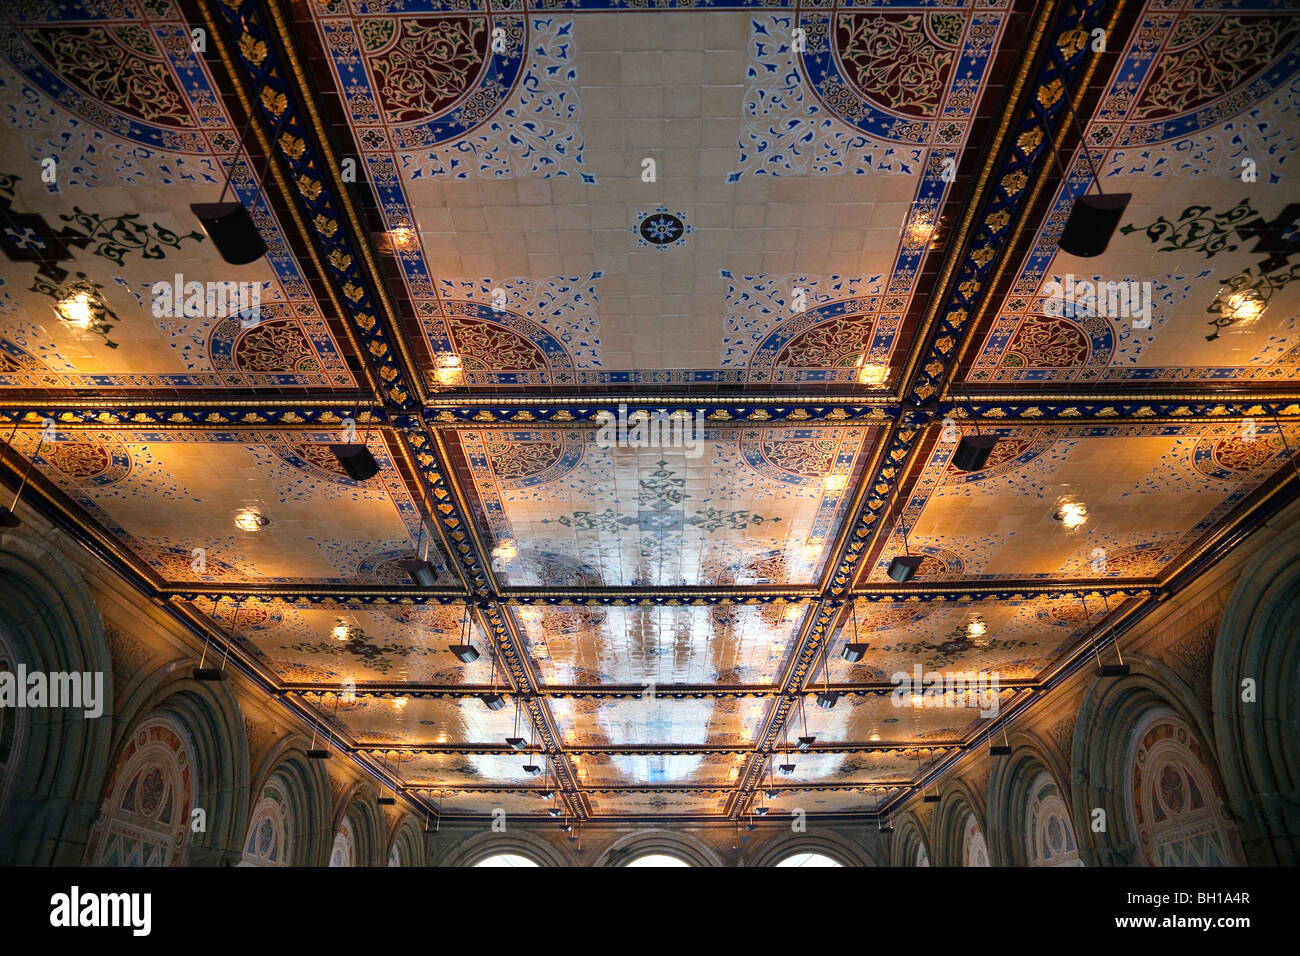 View of the Minton Tiles at Bethesda Terrace Arcade in Central Park, New York City. Stock Photo